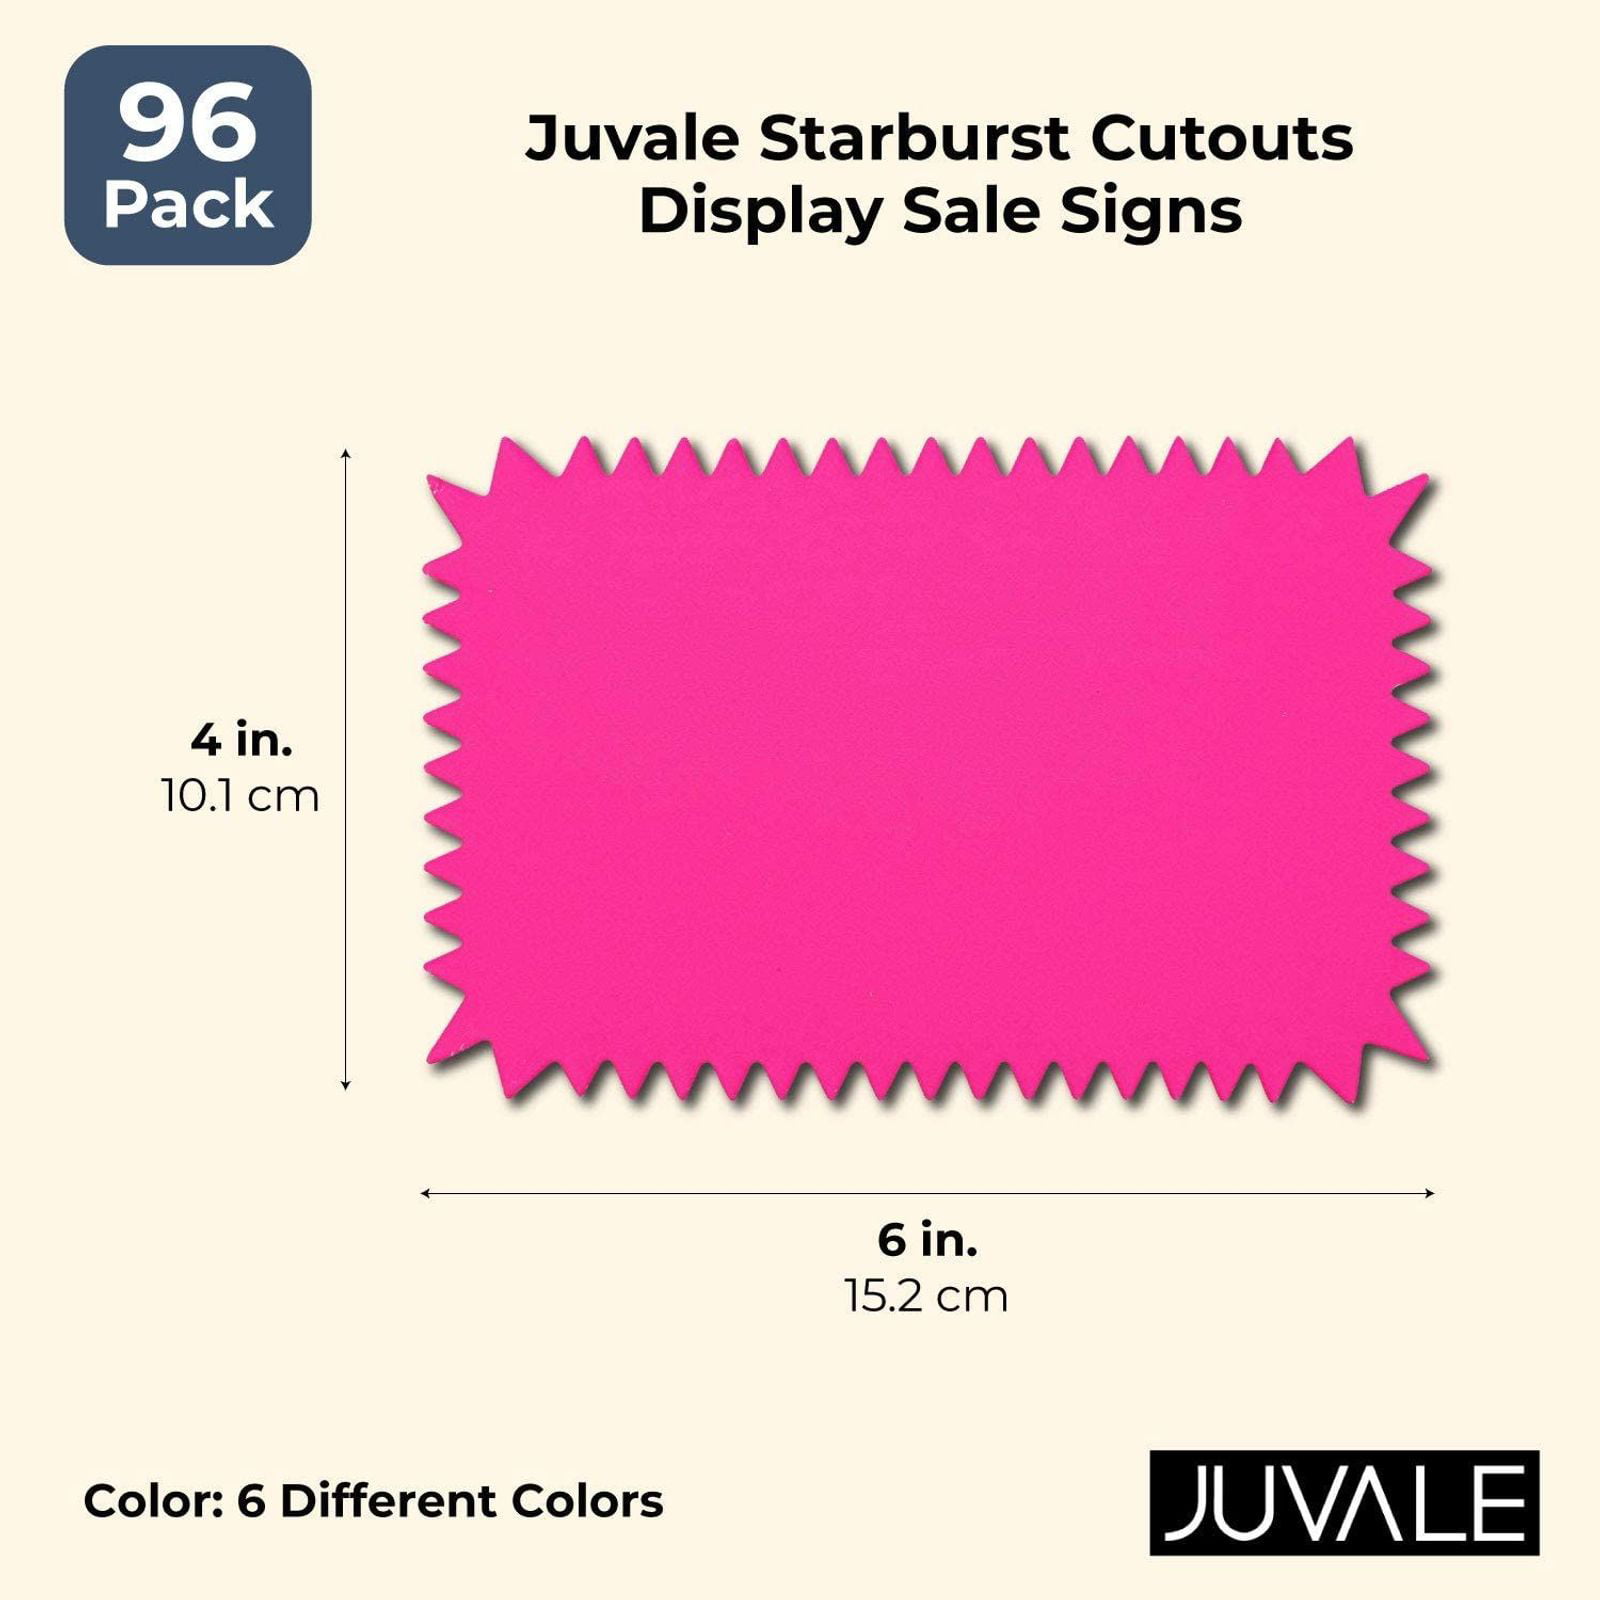 6 Colors 4 x 6 Inches Pack of 96 Juvale Starburst Cutouts Display Sale Signs 